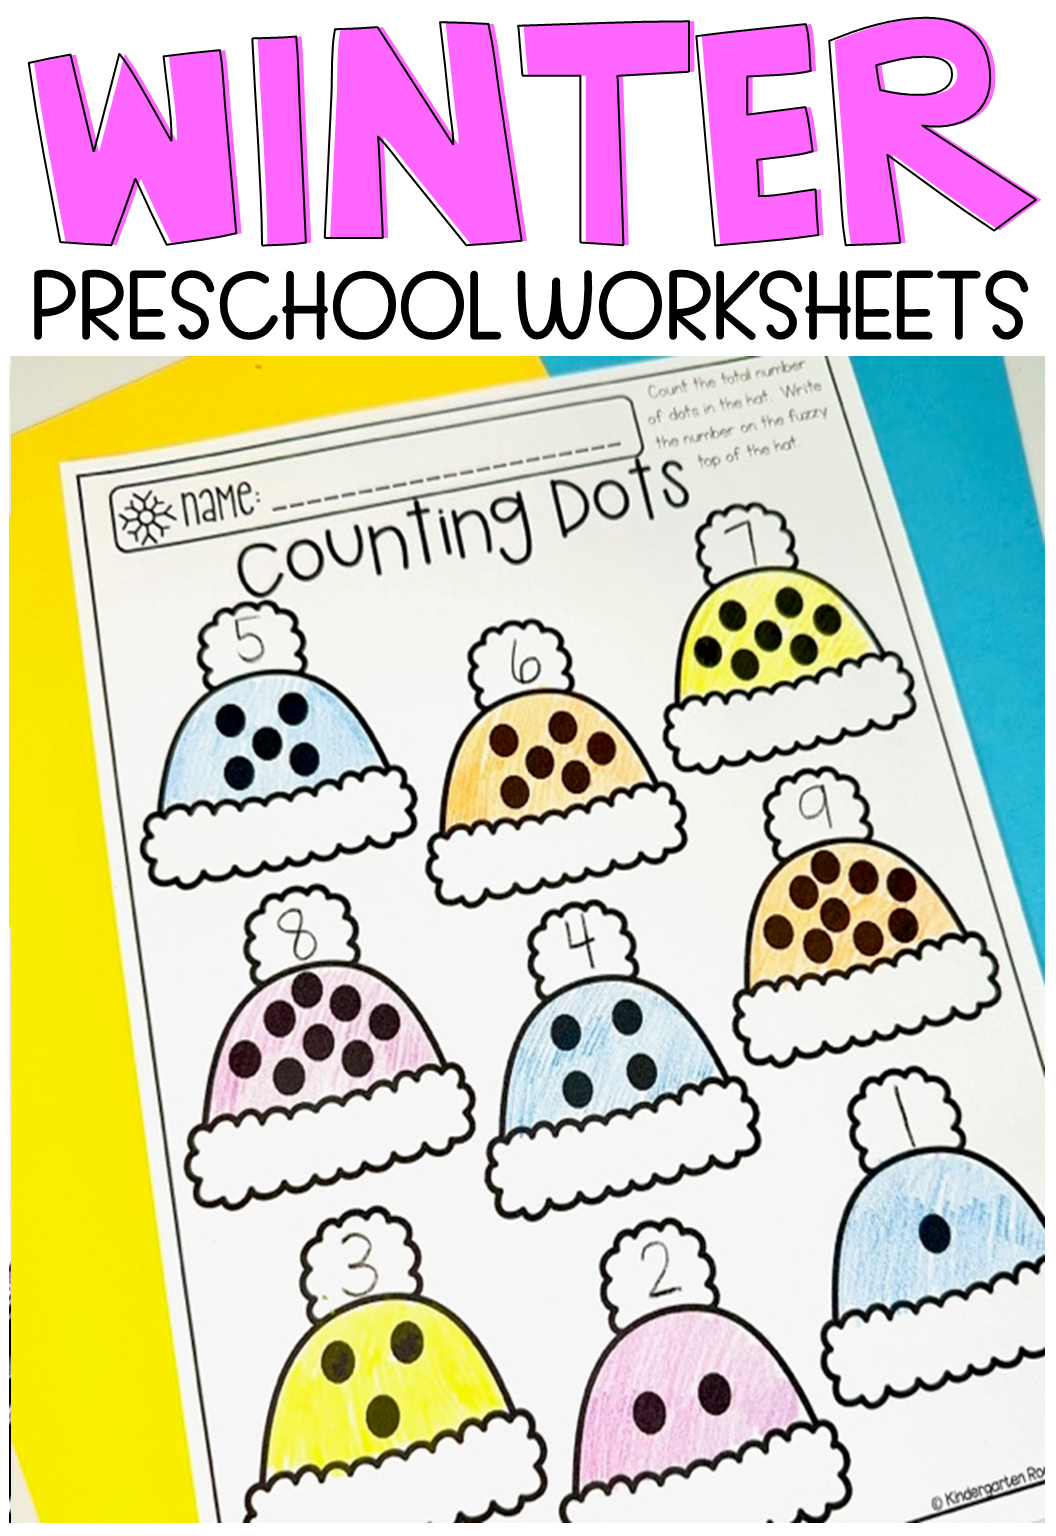 Are you looking for no-prep winter activities, printables and math and literacy worksheets for your preschool or kindergarten classroom? Then you will love our Winter Math and Literacy Worksheets for Preschool.